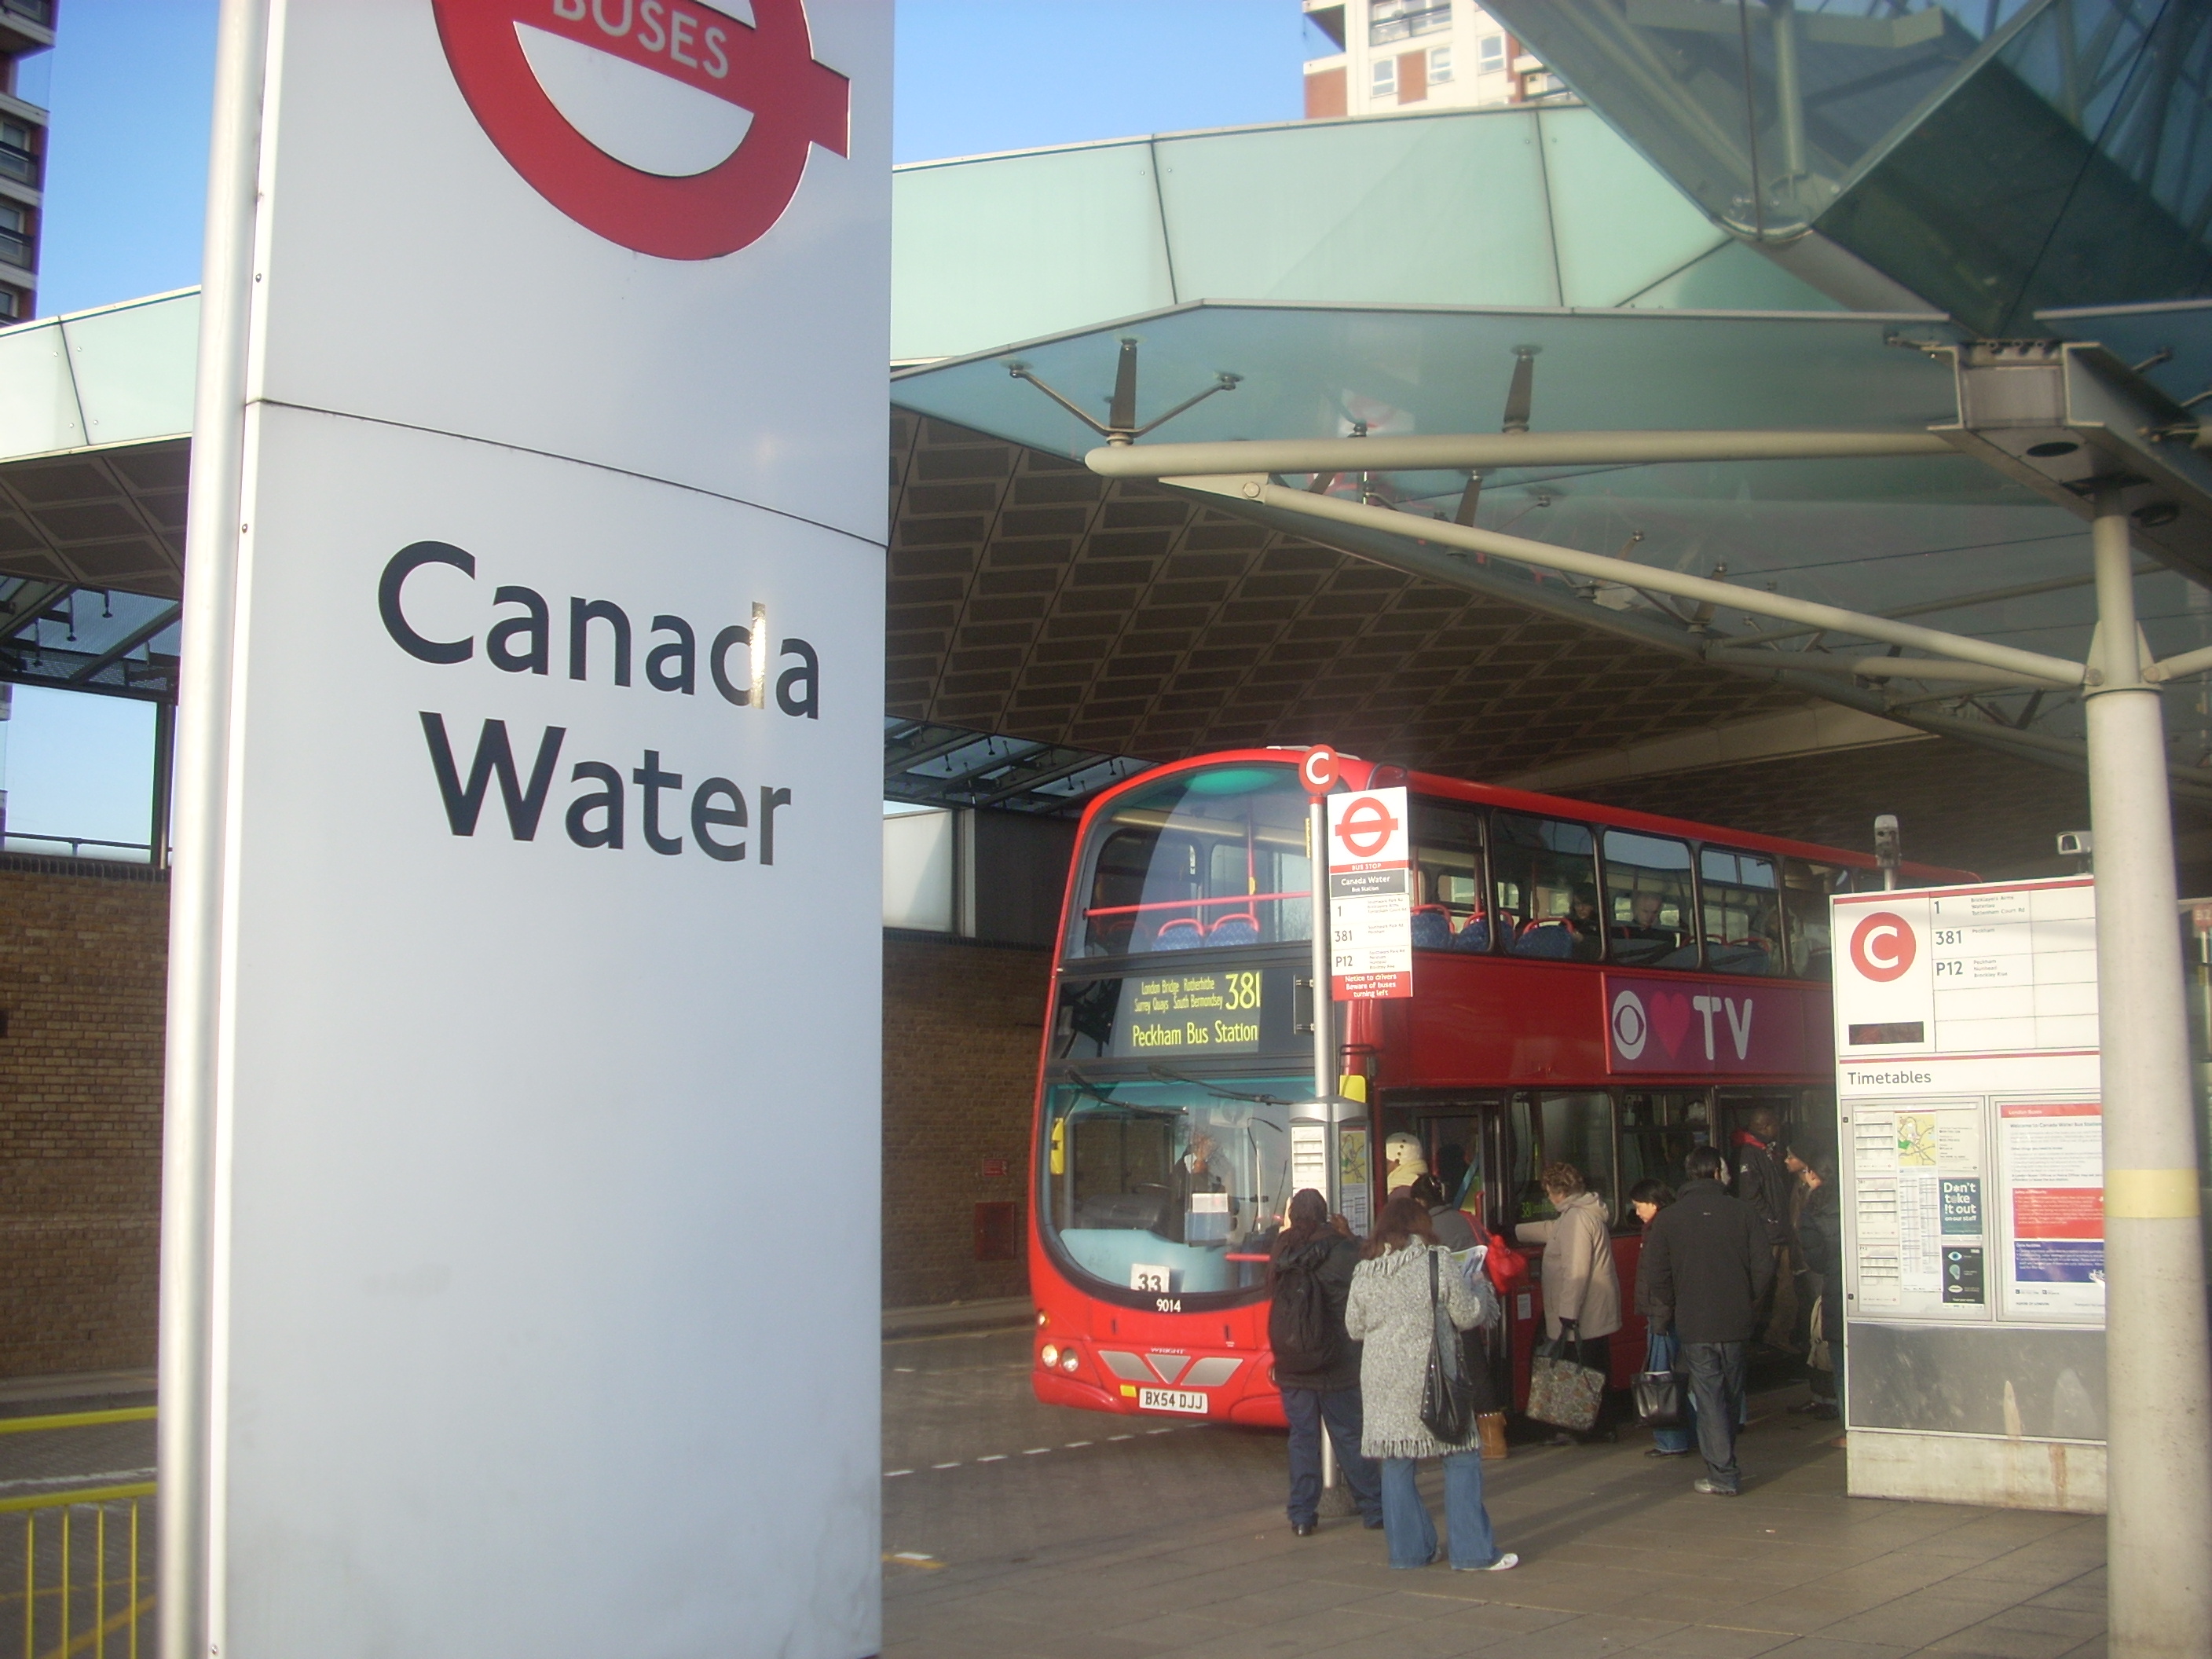 Canada Water bus station